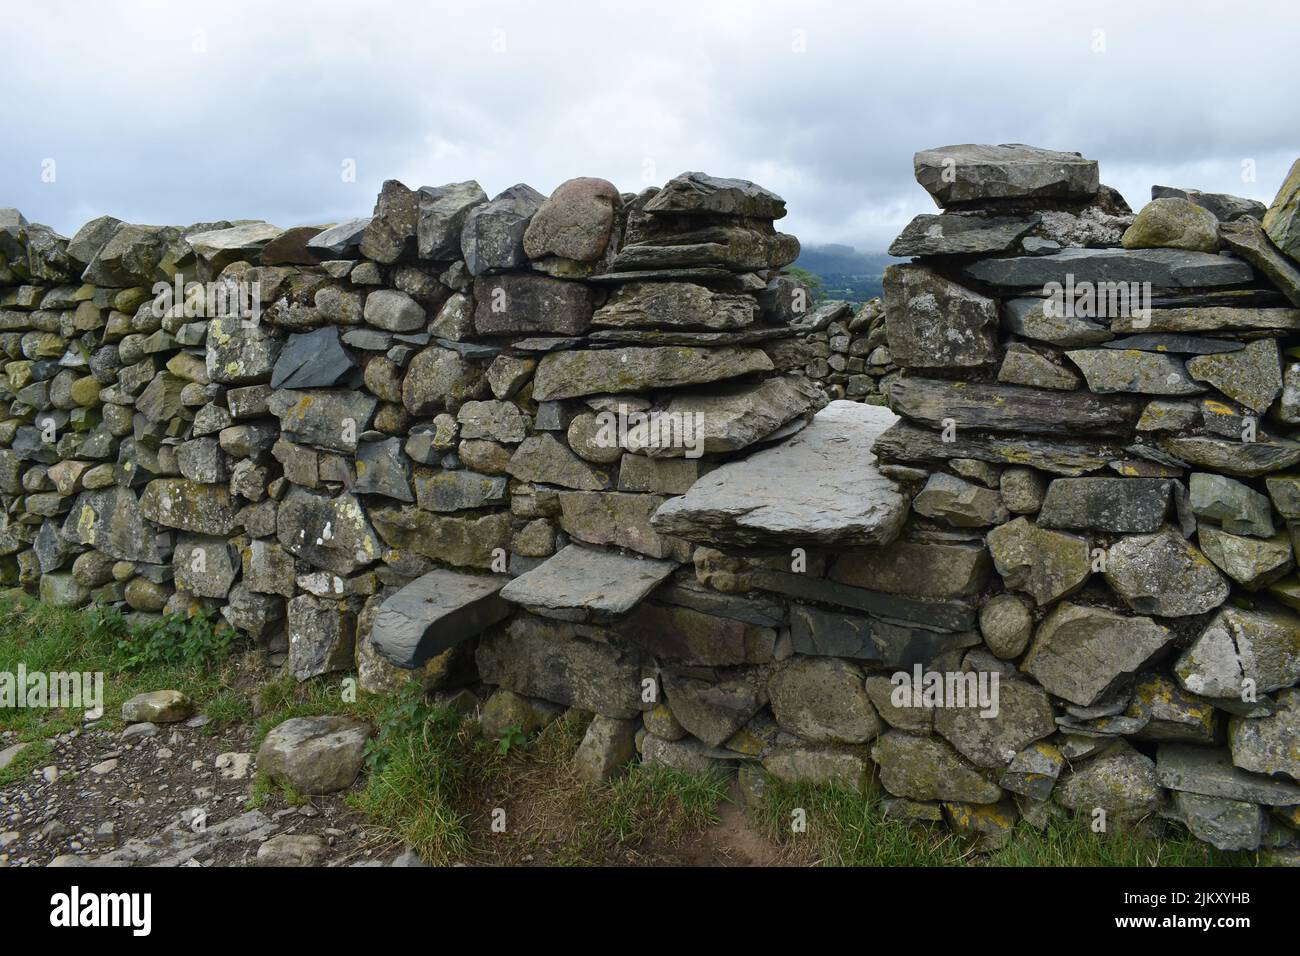 A stile in a dry stone wall at the Castlerigg Stone Circle in the Lake District National Park. Stock Photo